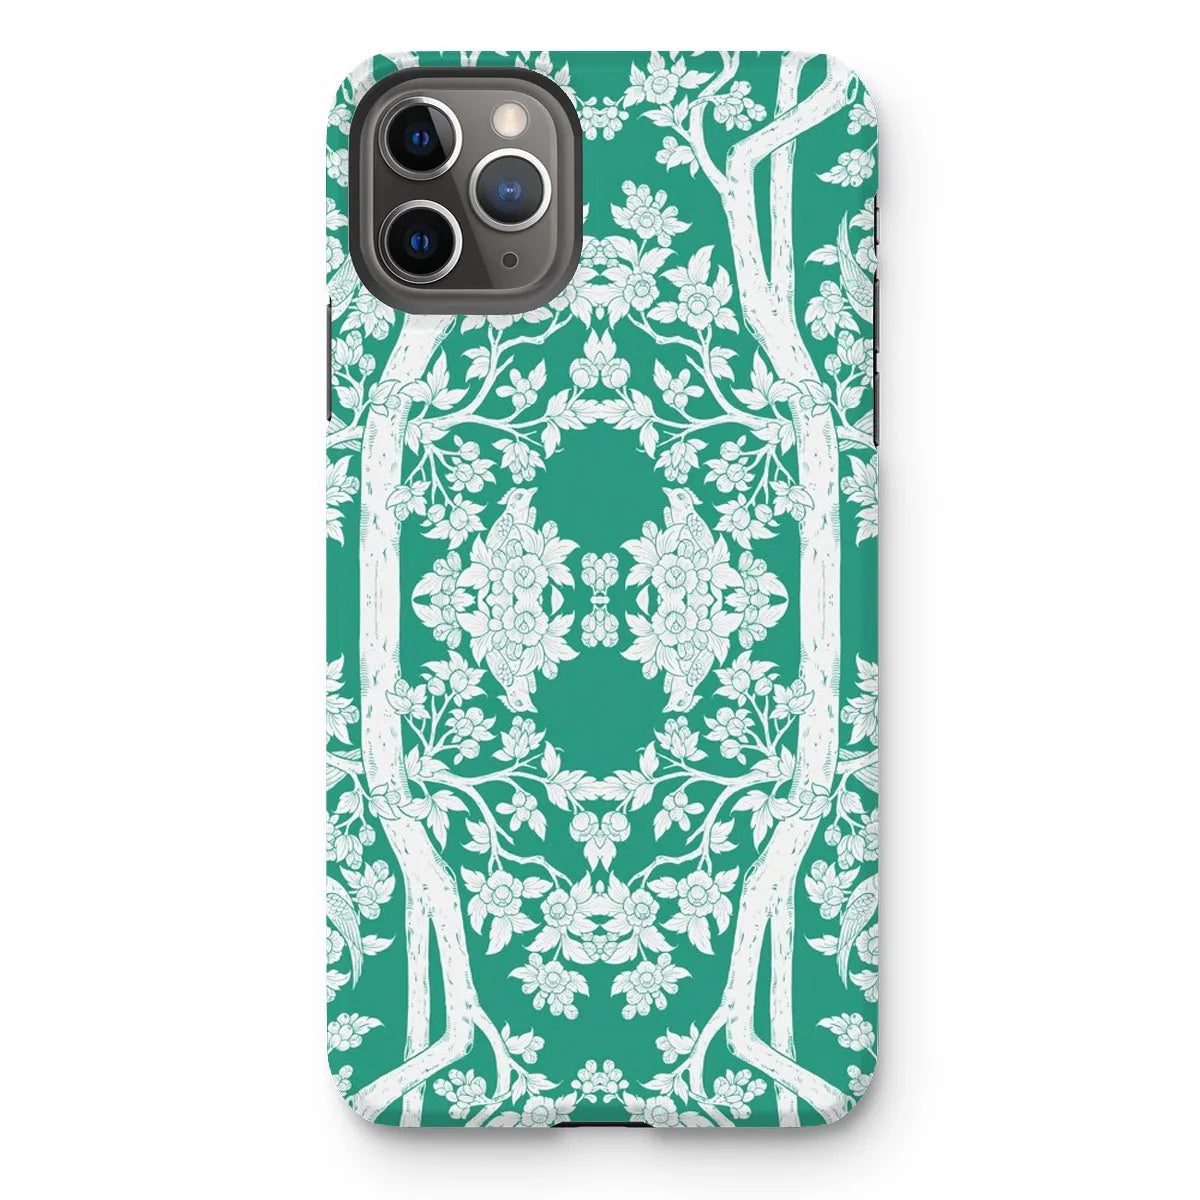 Aviary Green Aesthetic Pattern Art Phone Case - Iphone 11 Pro Max / Matte - Mobile Phone Cases - Aesthetic Art